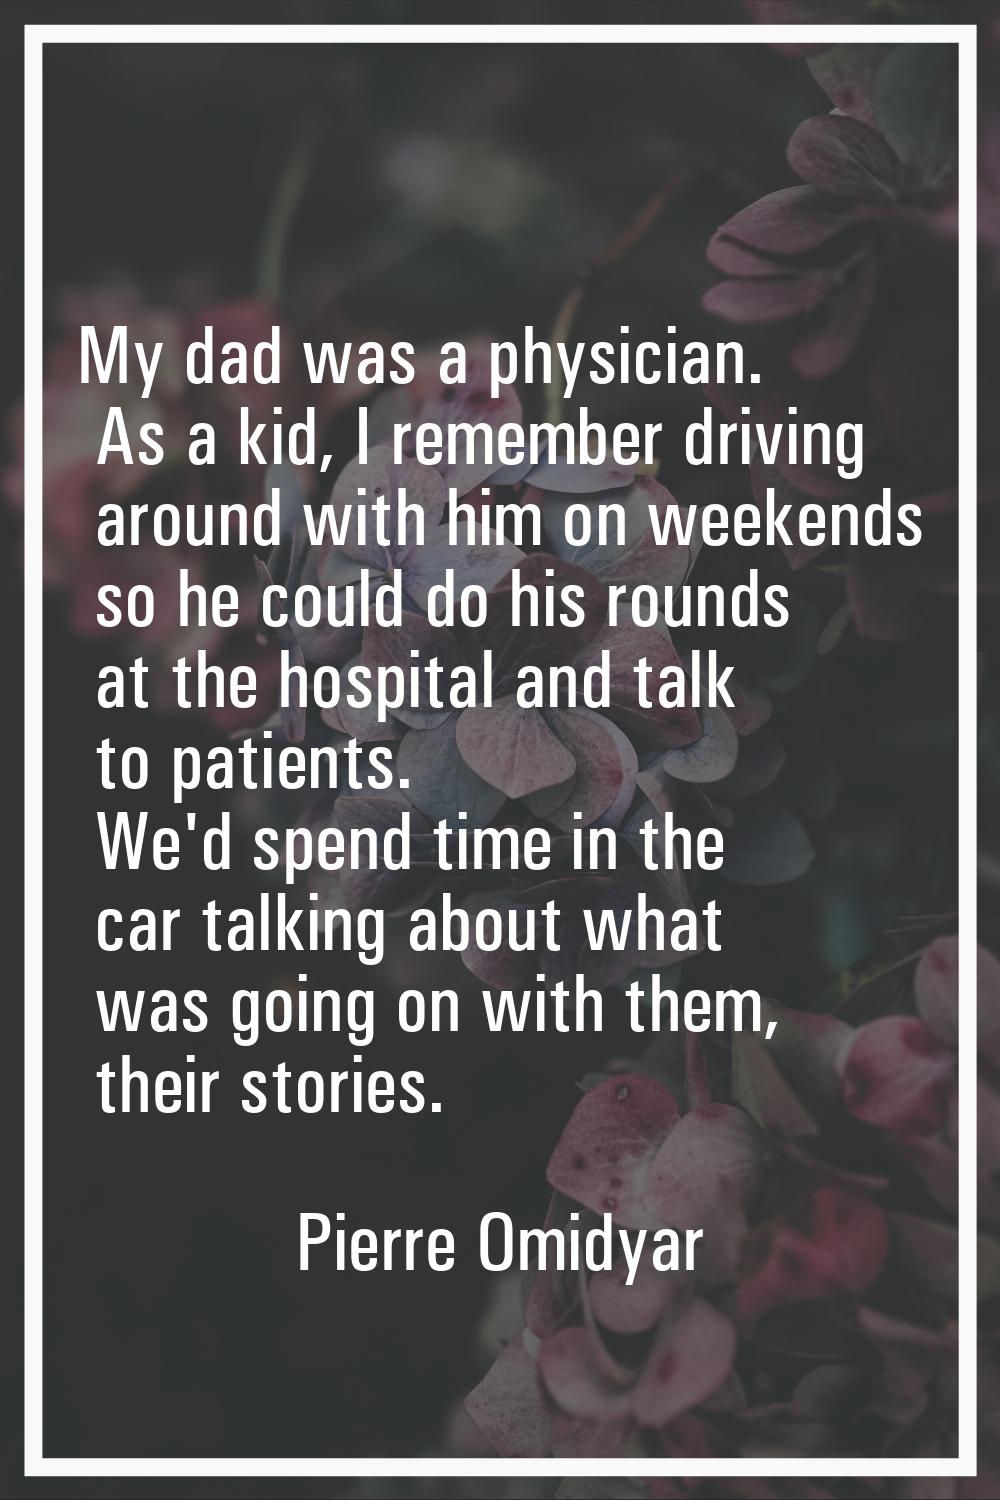 My dad was a physician. As a kid, I remember driving around with him on weekends so he could do his